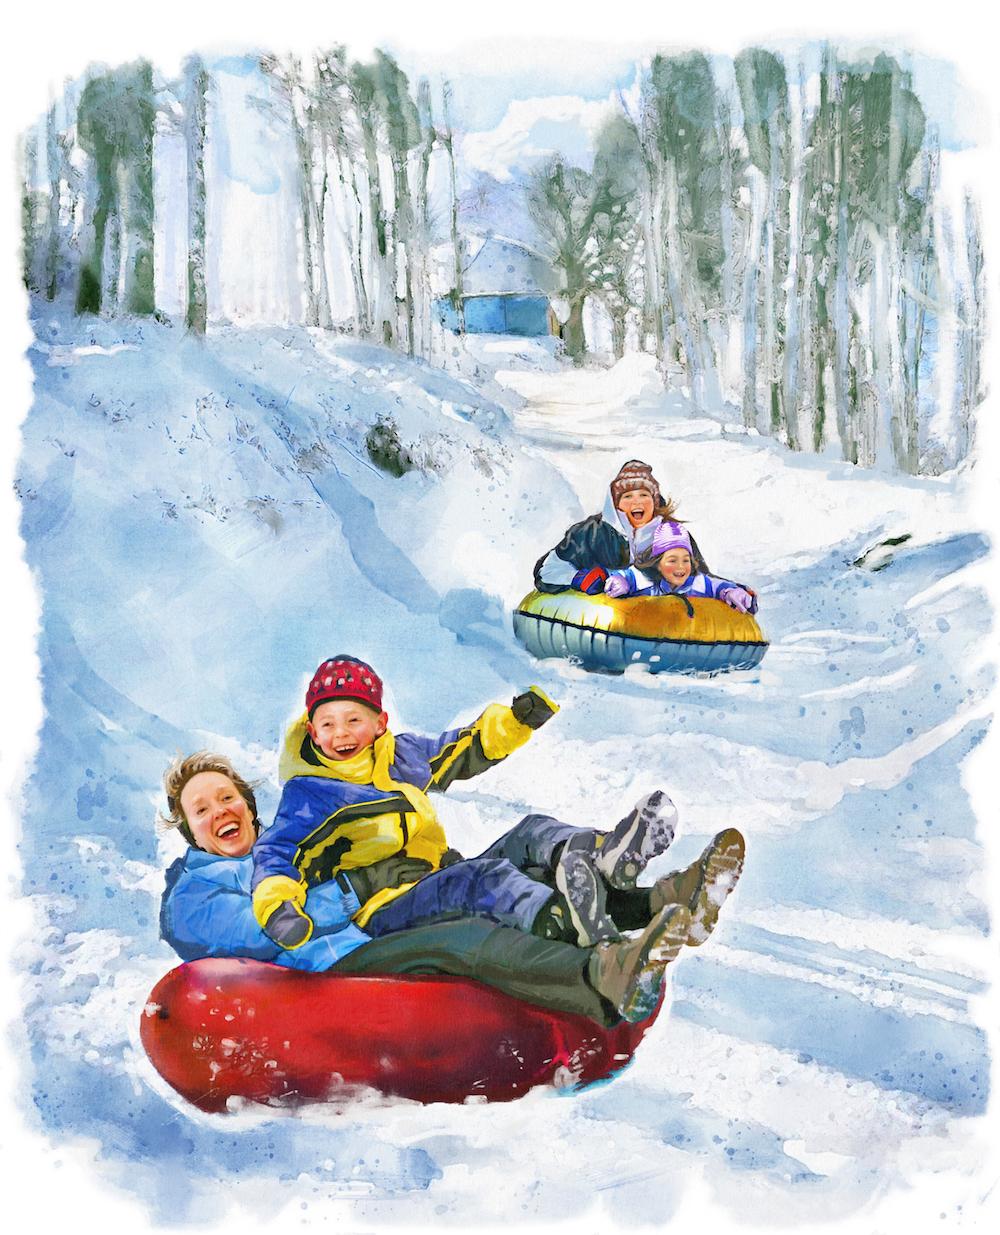 Mixing things up with exciting activities, such as sledding, is a great way for both kids and adults to have fun. (Biba Kayewich)